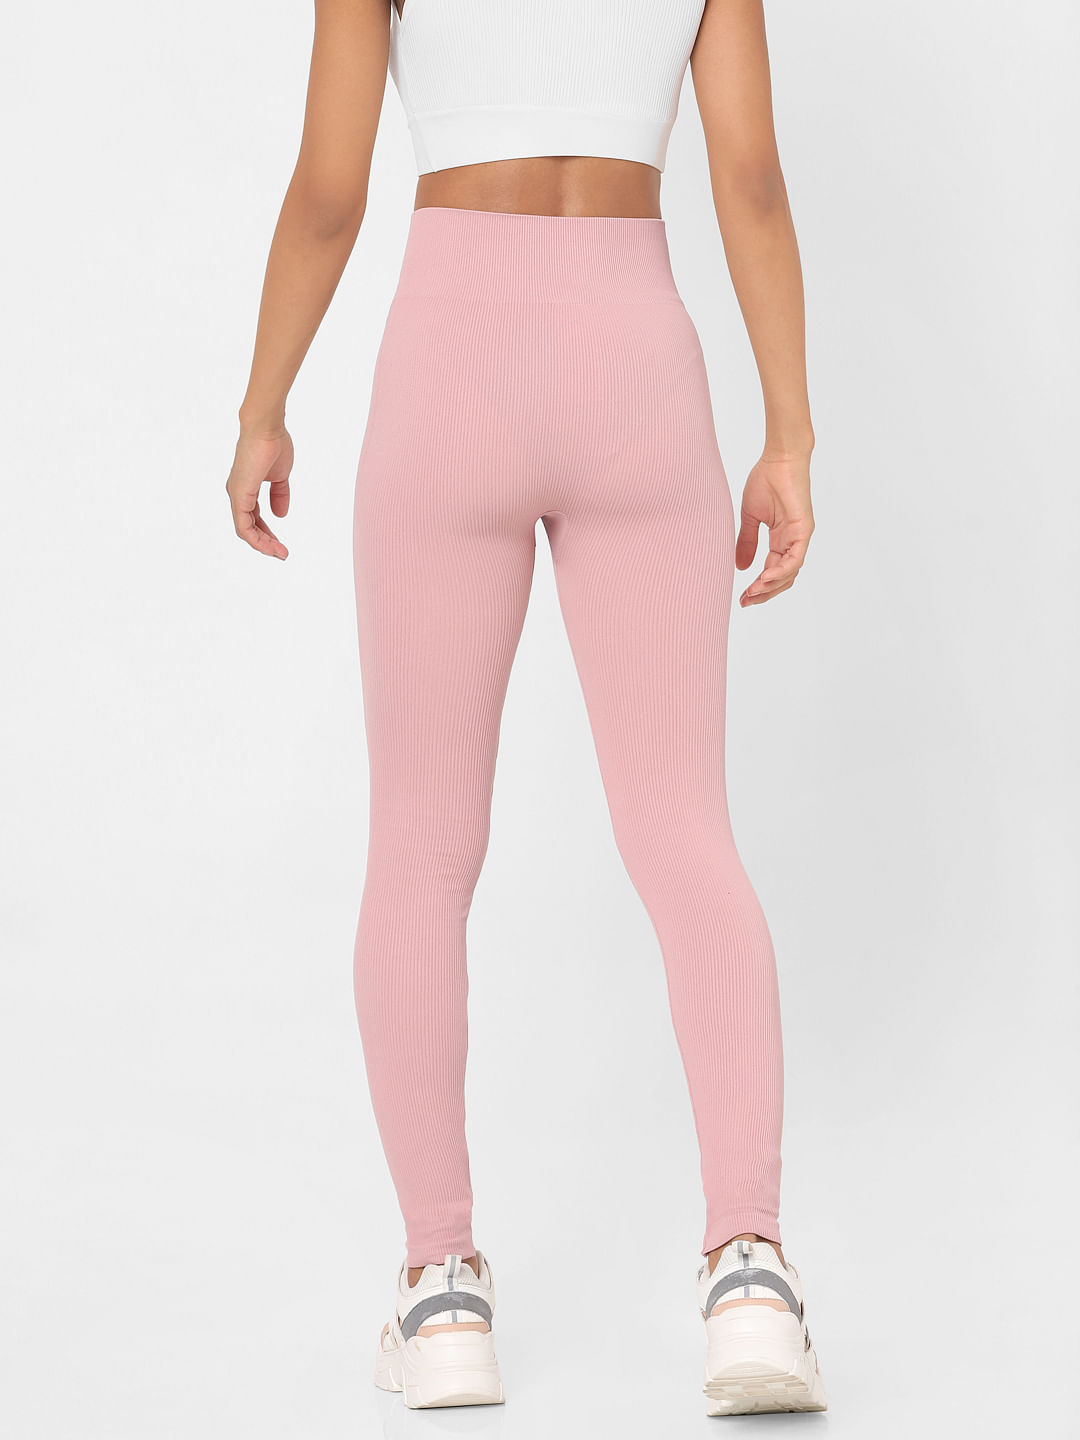 rose pink fit girl and woman gym legging fancy yoga pants tight gym legging  fitted girls jegging woman gym jegging tight gym pants